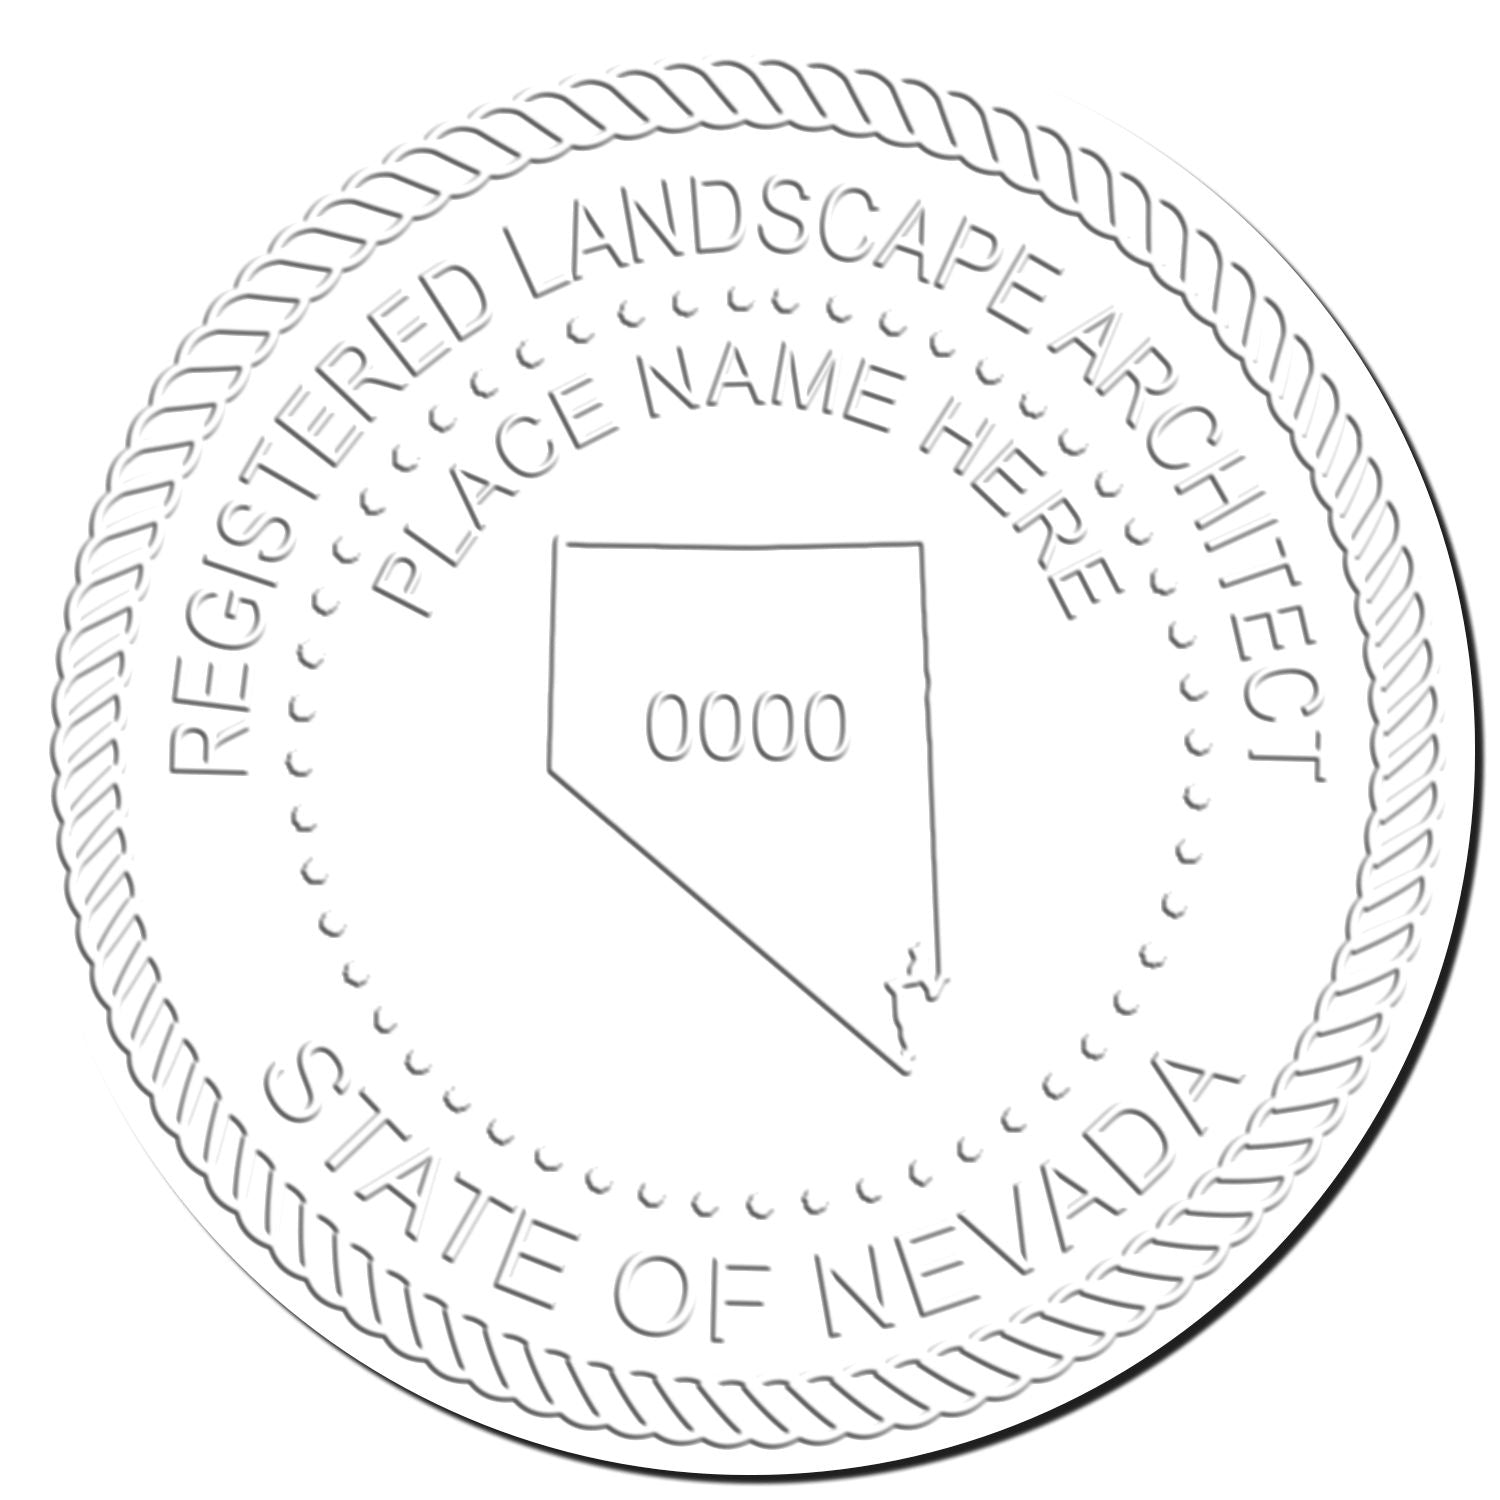 This paper is stamped with a sample imprint of the Nevada Long Reach Landscape Architect Embossing Stamp, signifying its quality and reliability.